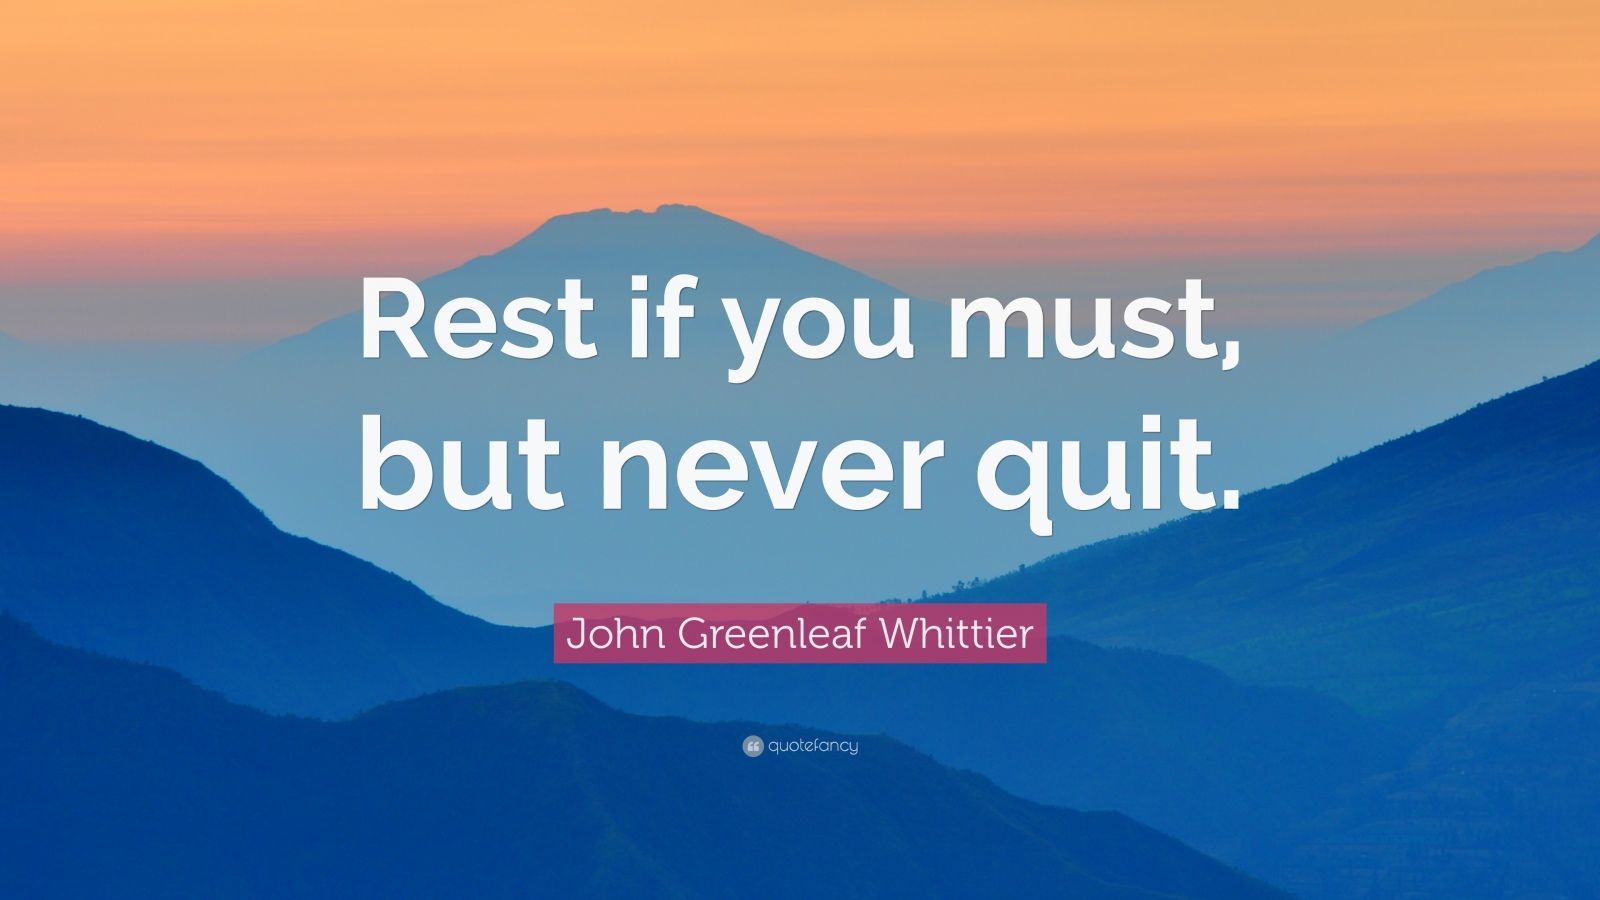 John Greenleaf Whittier Quote: “Rest if you must, but never quit.” (7 ...